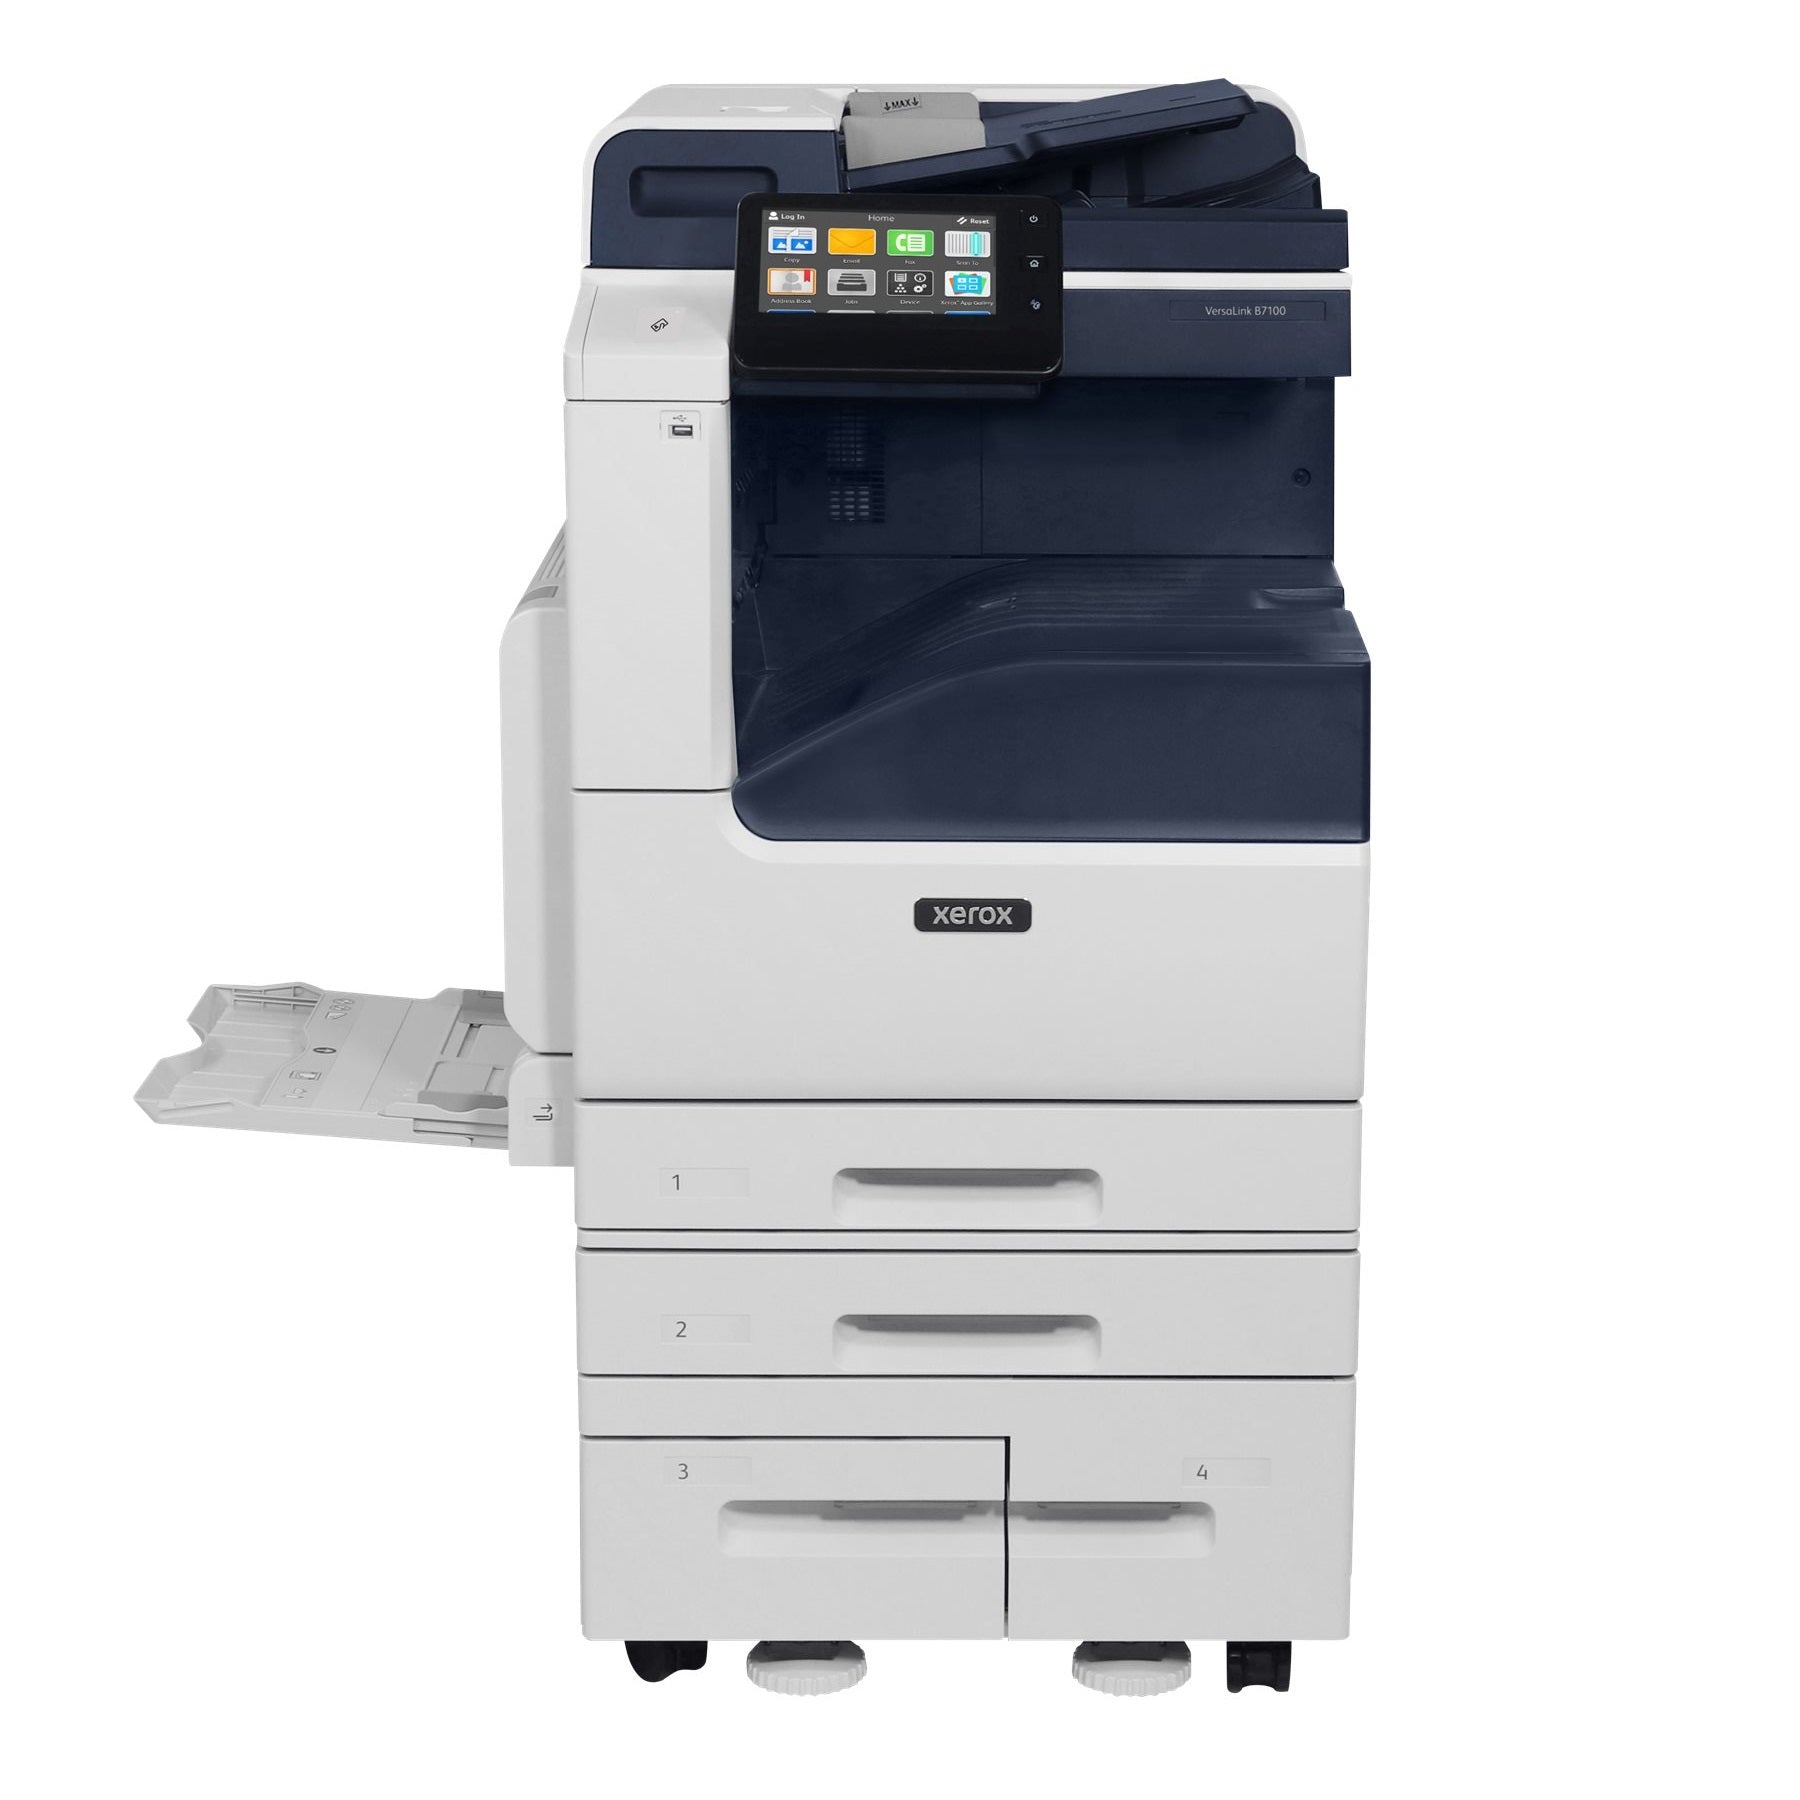 Xerox Versalink B7130 Black And White Multifunction Office Copier Printer Scanner With Support For Tabloid